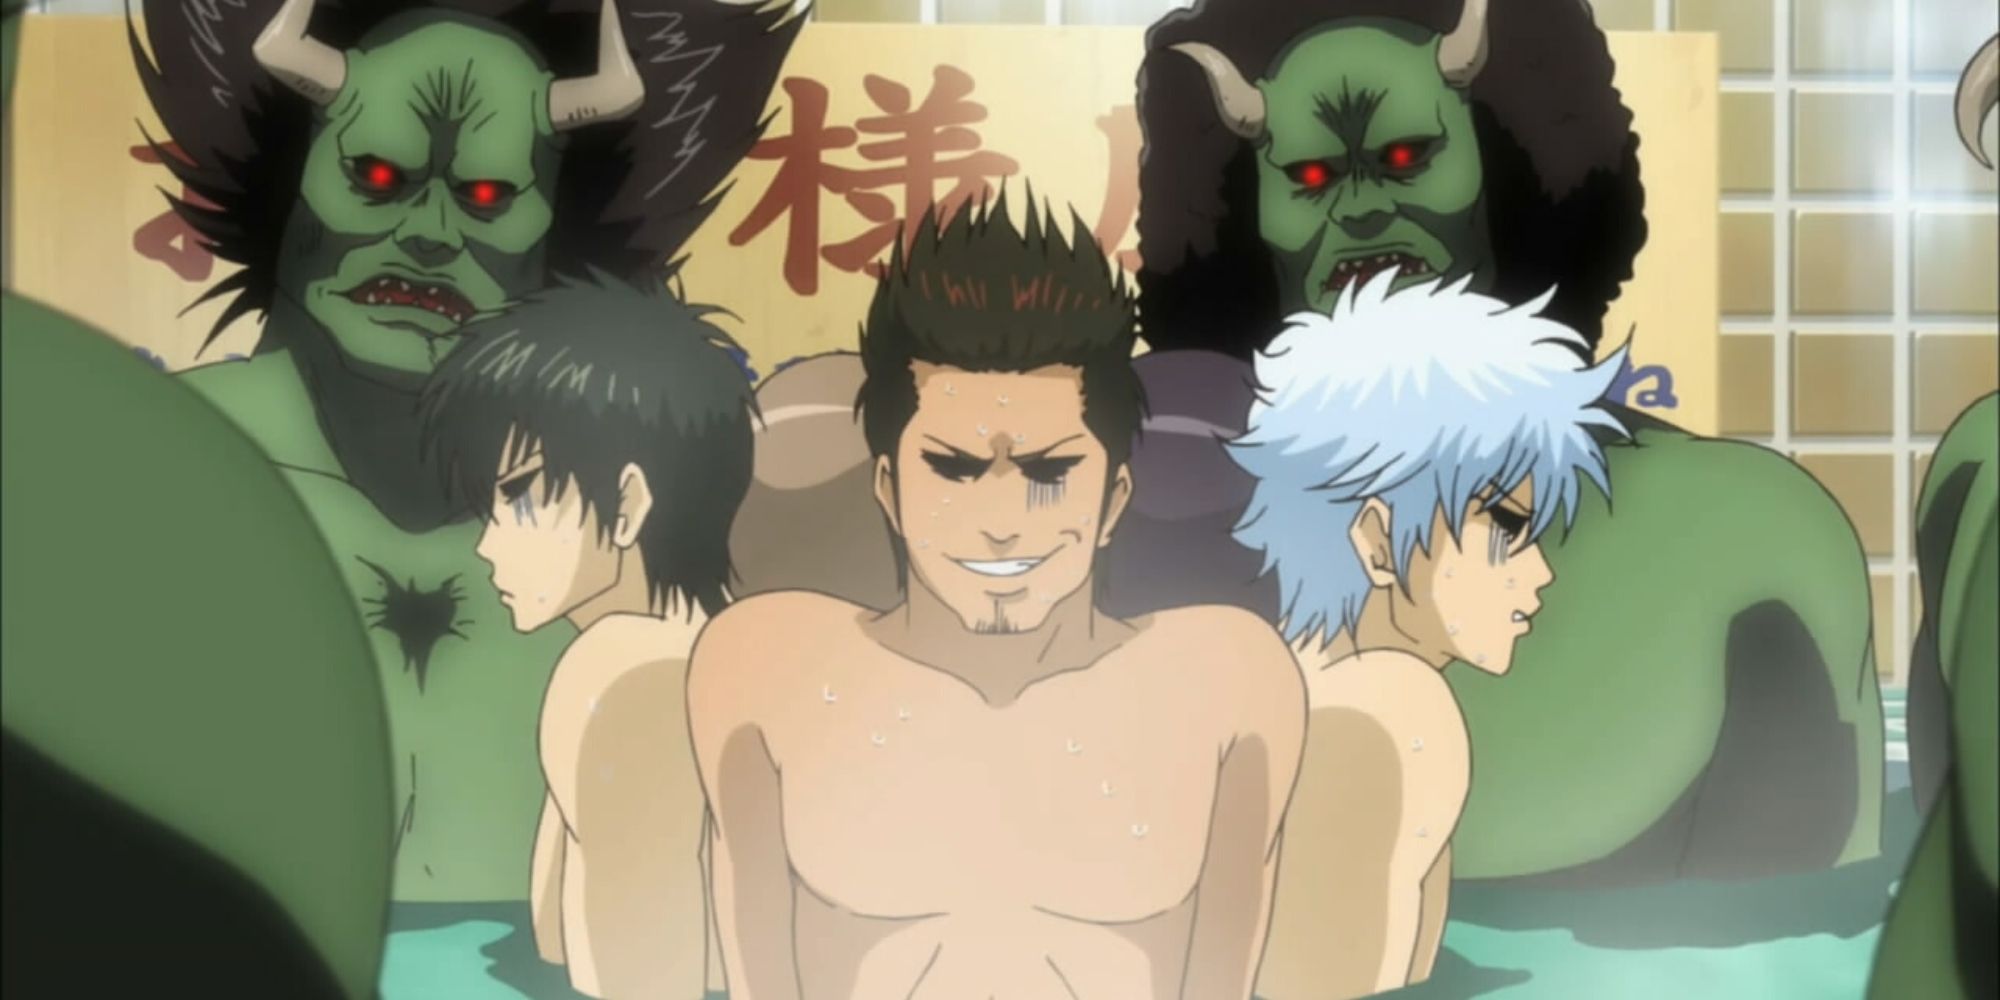 Gintoki, friends, and monsters in Gintama